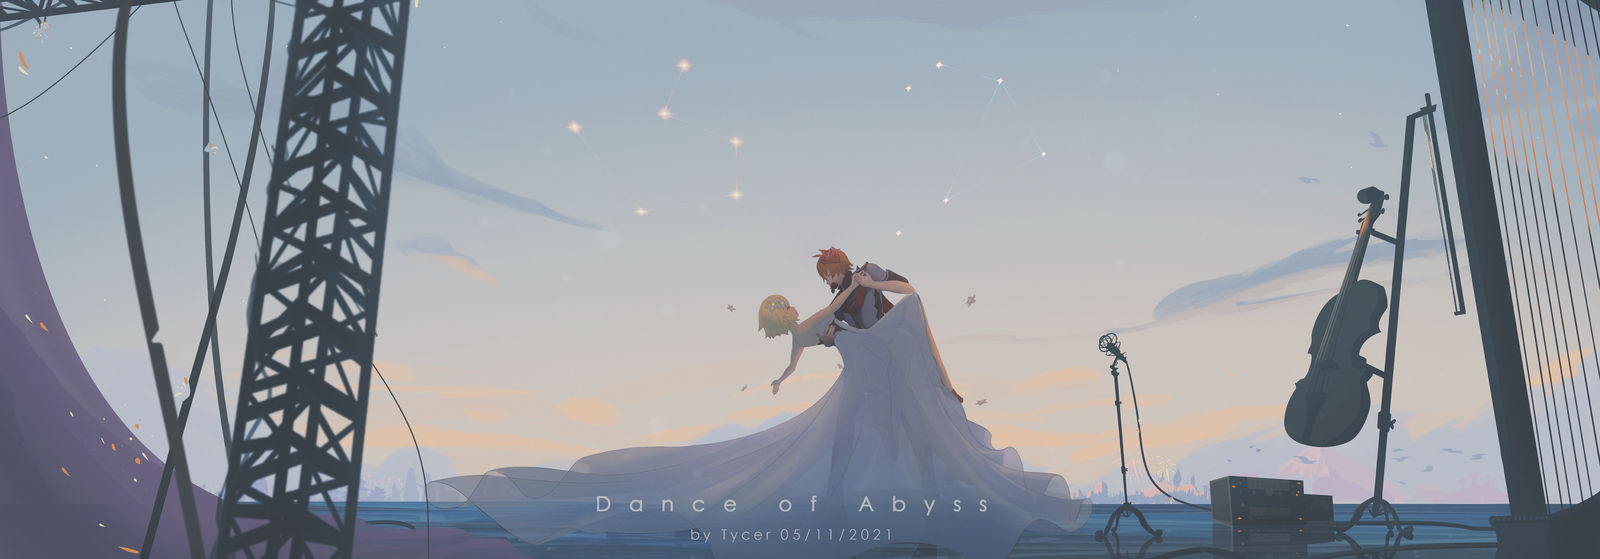 Dance of Abyss